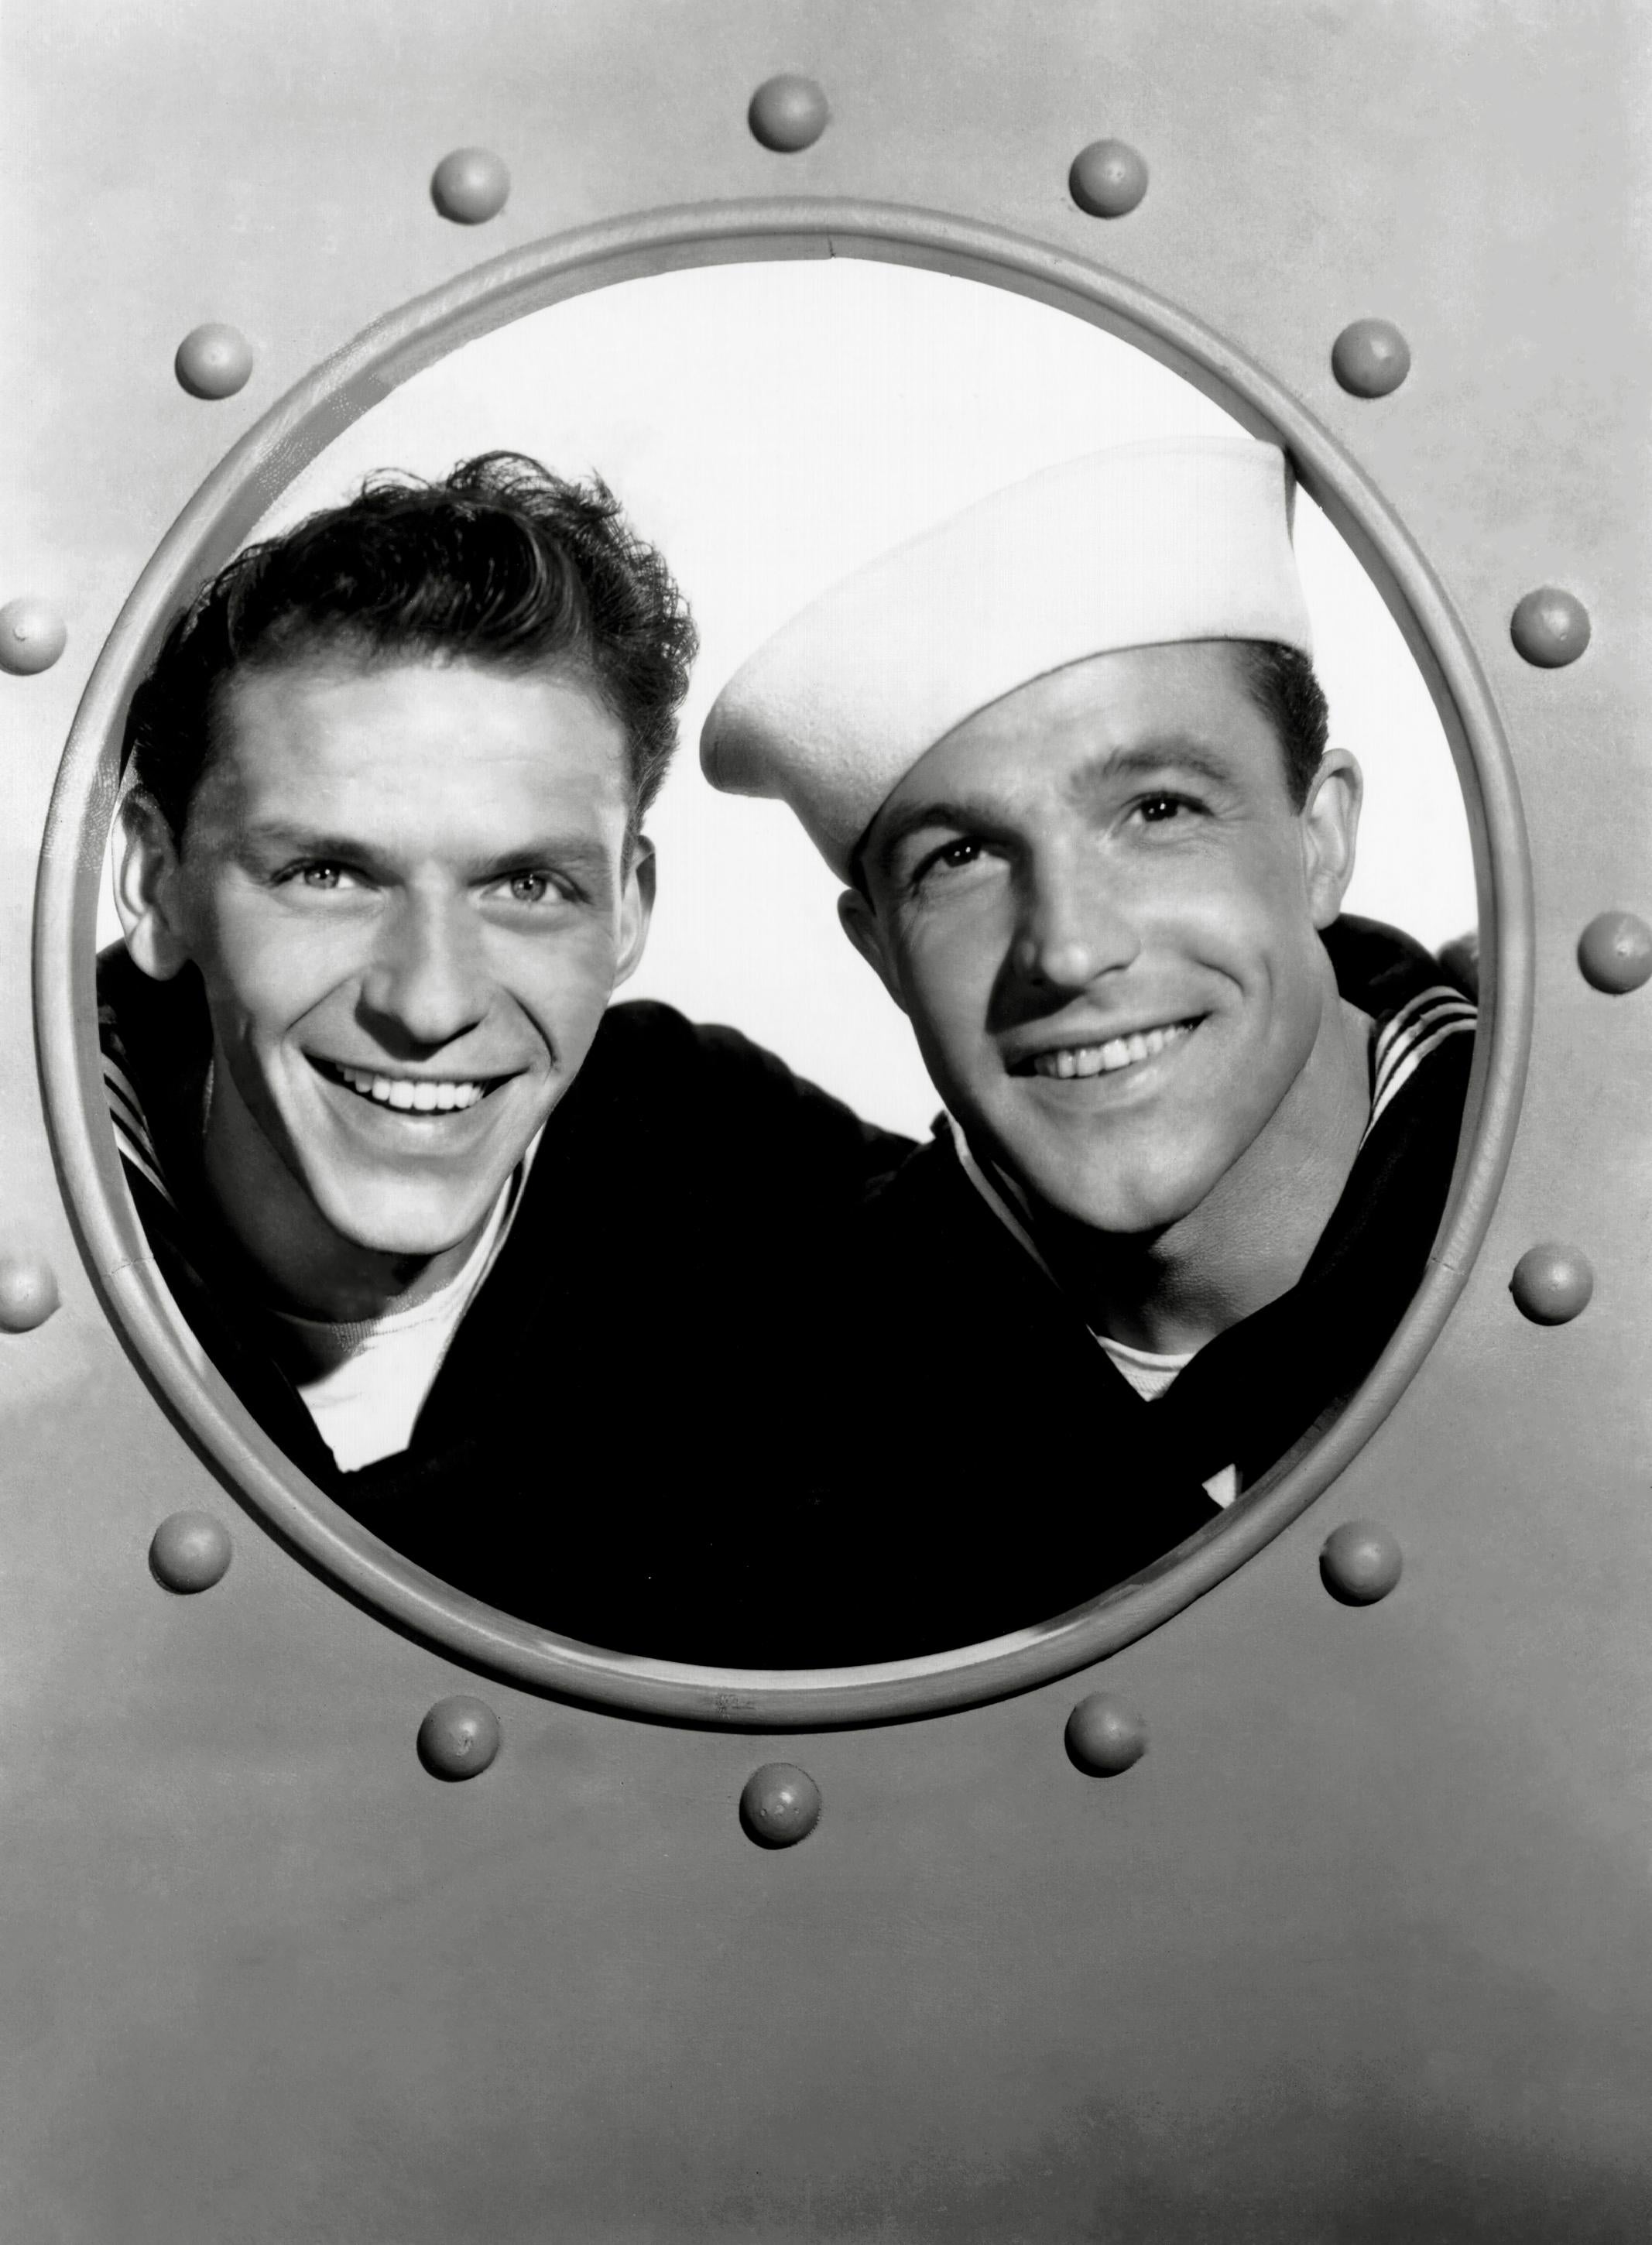 Unknown Portrait Photograph - Gene Kelly and Frank Sinatra "Anchors Aweigh" Globe Photos Fine Art Print